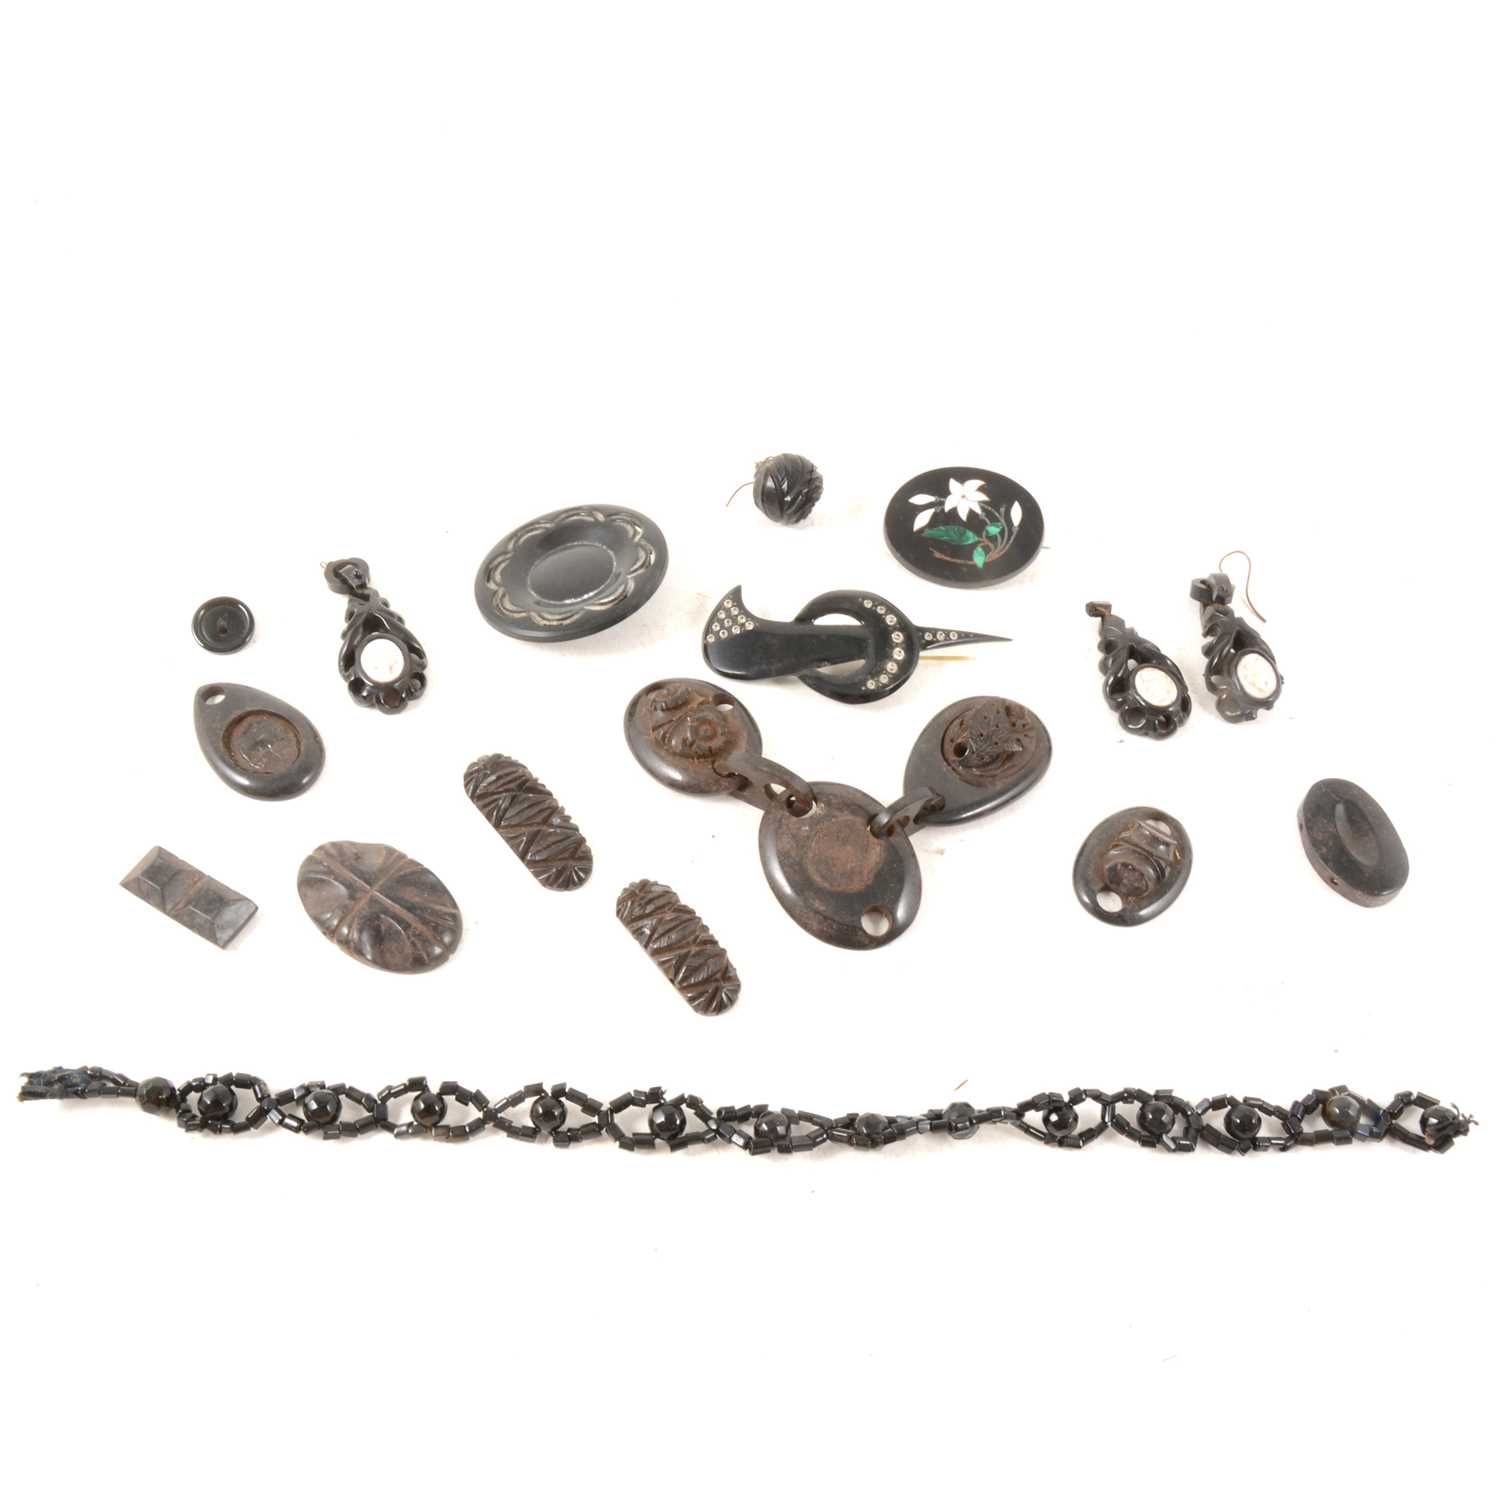 Lot 129 - 'Black Mourning Jewellery'. Inlaid brooch, earrings, necklace etc. etc.